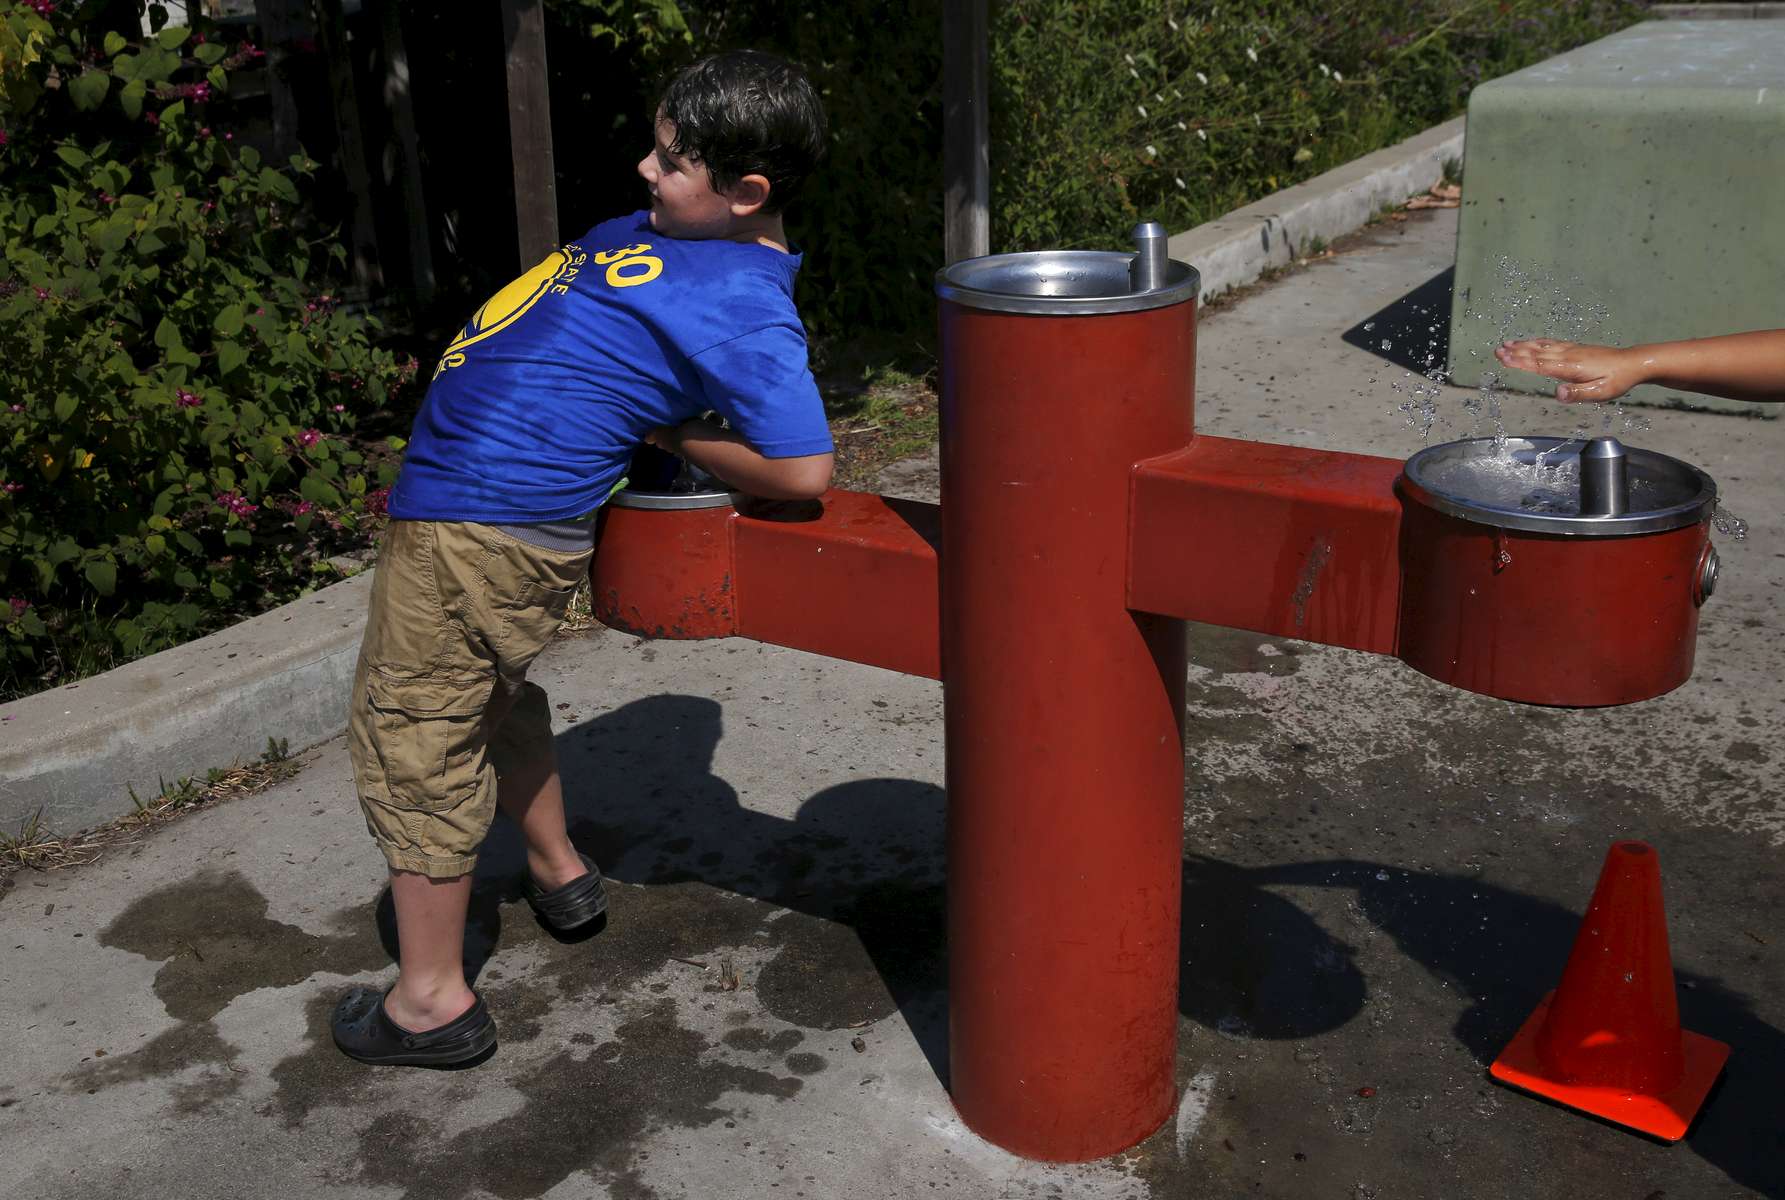 James Kaplan, 8, drenches his shirt in a water fountain while playing after school Sept. 7, 2016 in Berkeley, Calif.